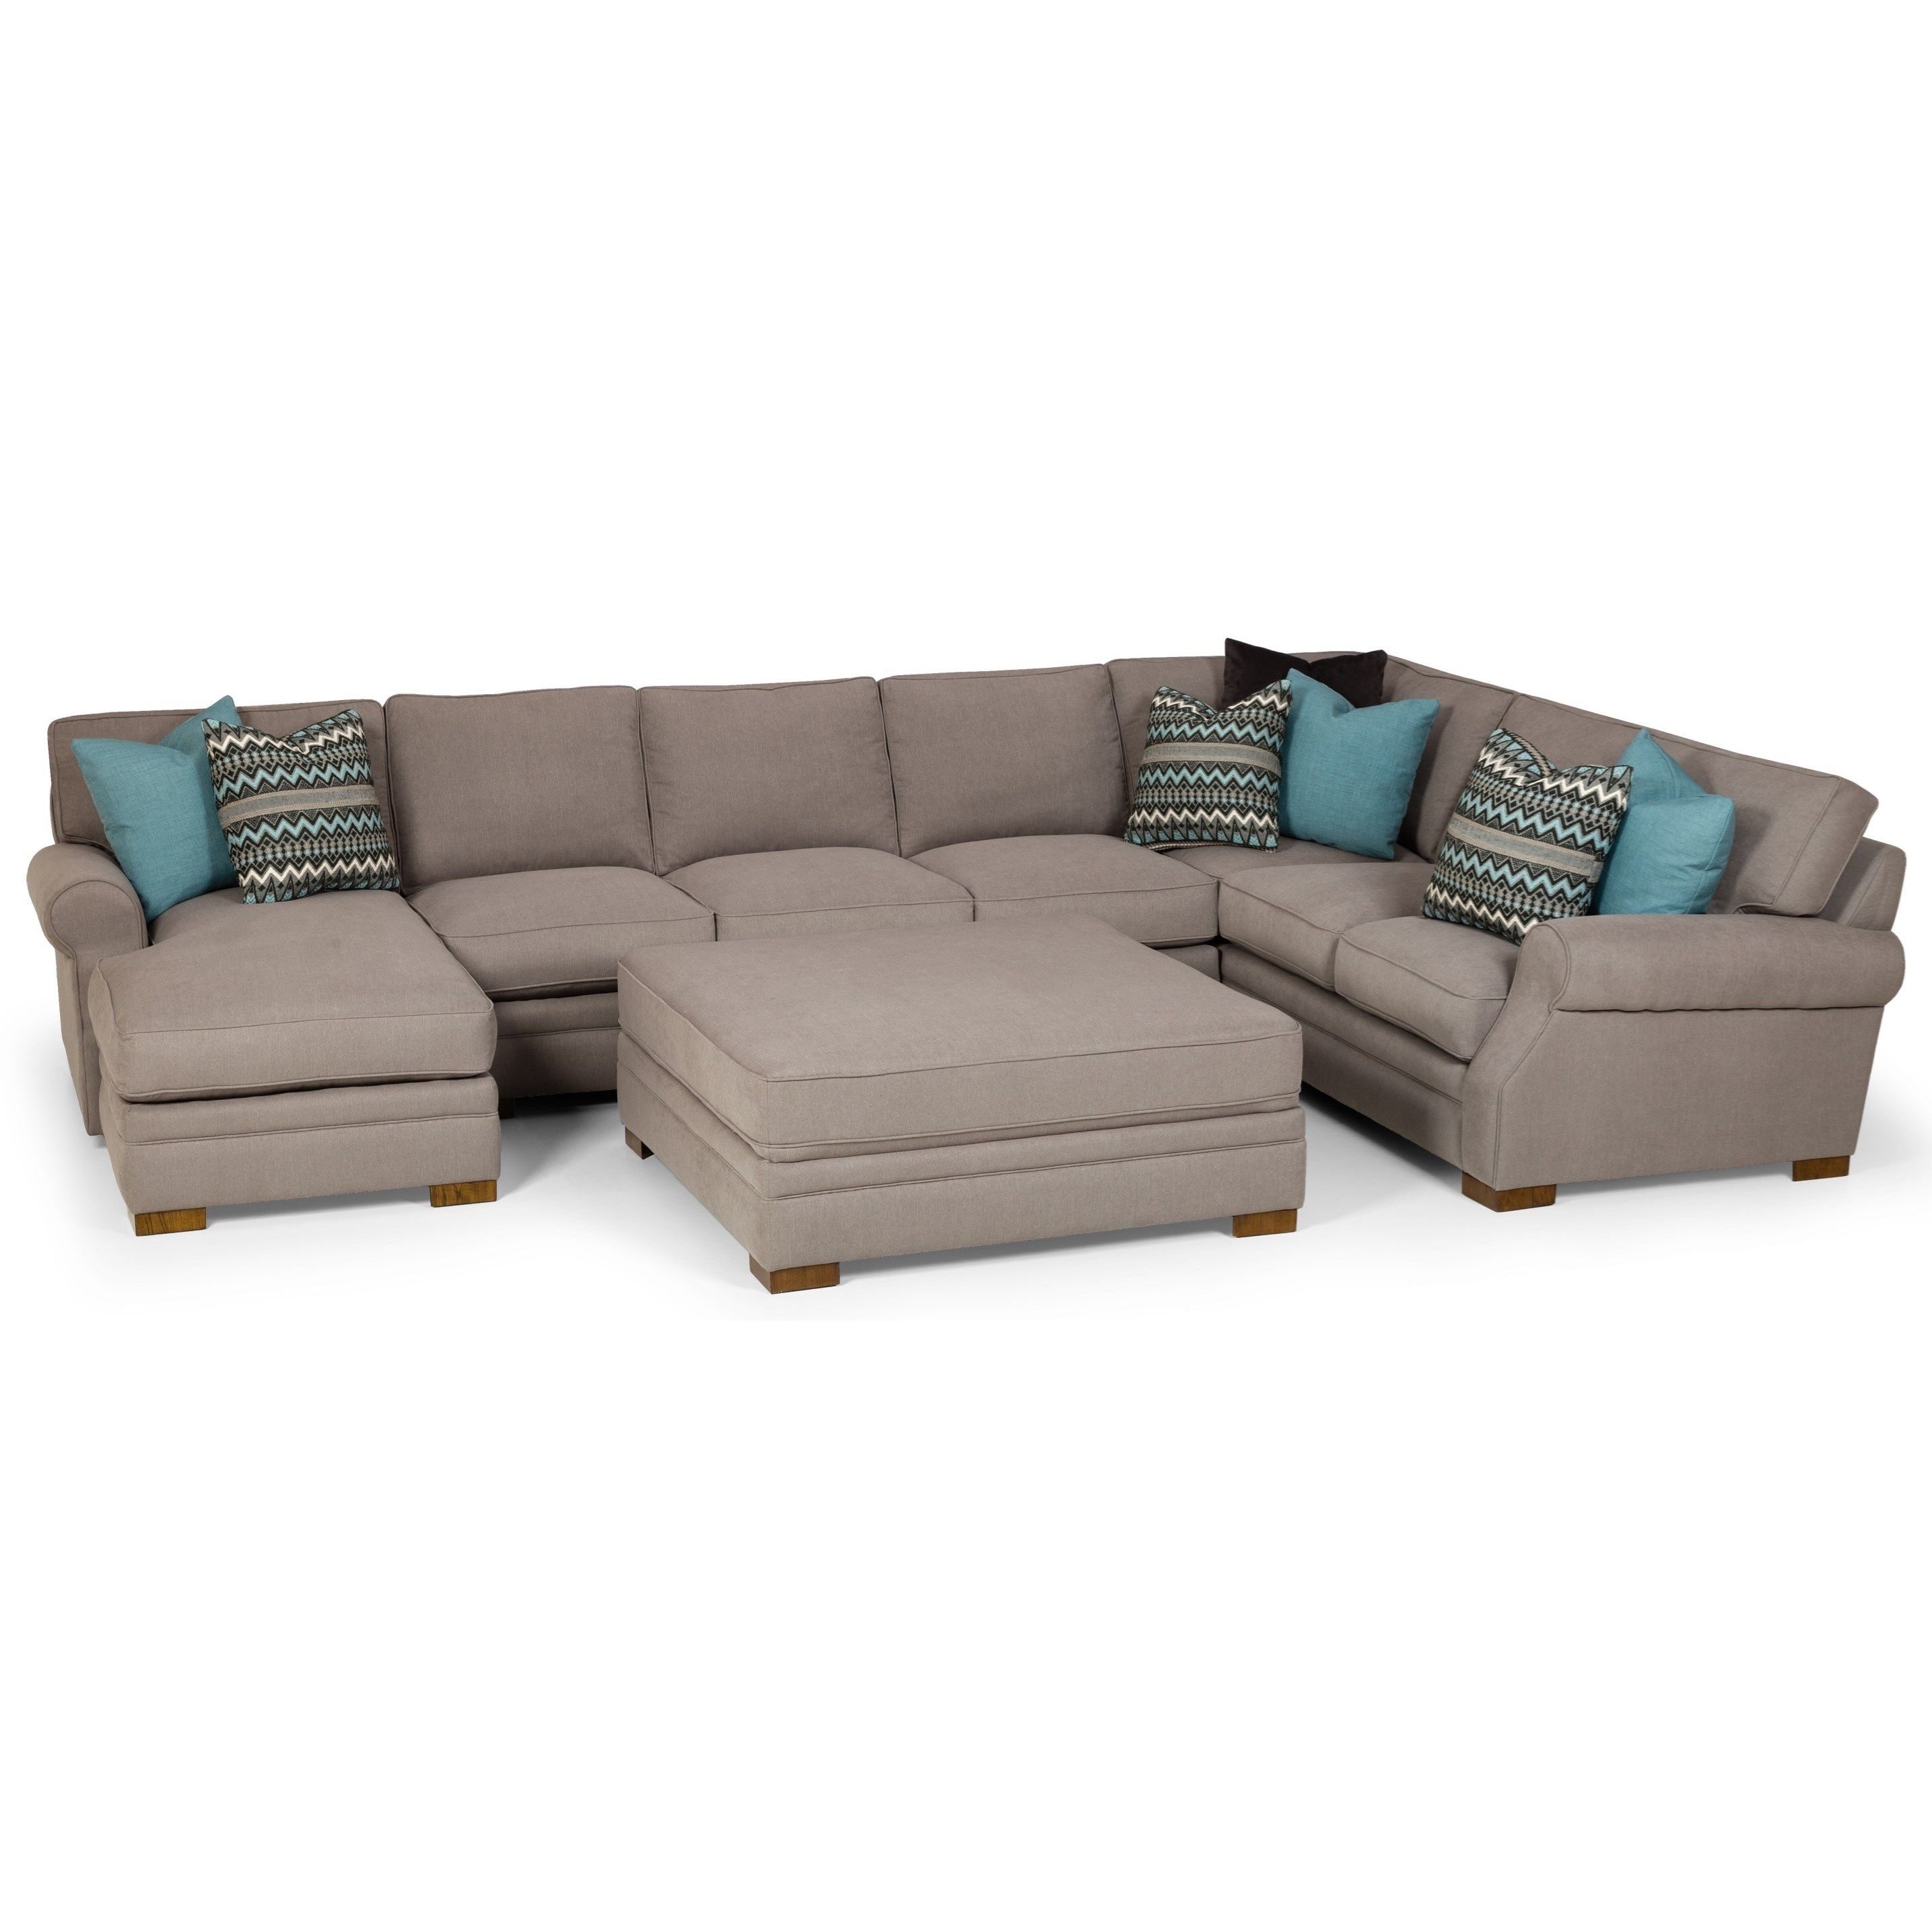 Sunset Home 525 6 Seat U Shape Sectional Sofa With Laf Chaise | Sadler'S  Home Furnishings | Sectional Sofas Regarding 6 Seater Sectional Couches (View 9 of 15)